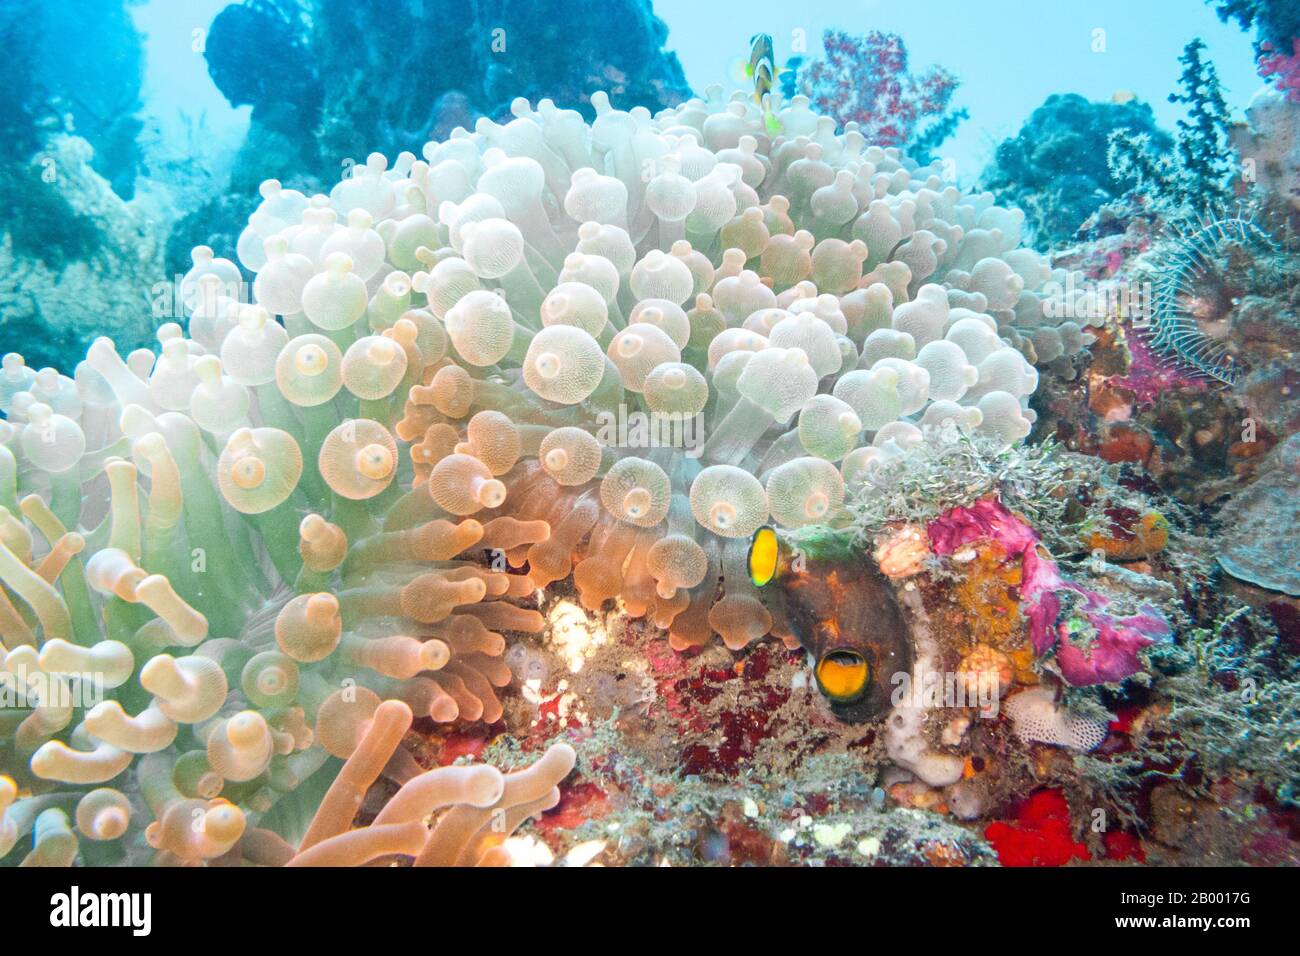 The bubble-tip anemone (Entacmaea quadricolor) is a species of sea anemone in the family Actiniidae. Photographed off the east coast of Bali. Stock Photo